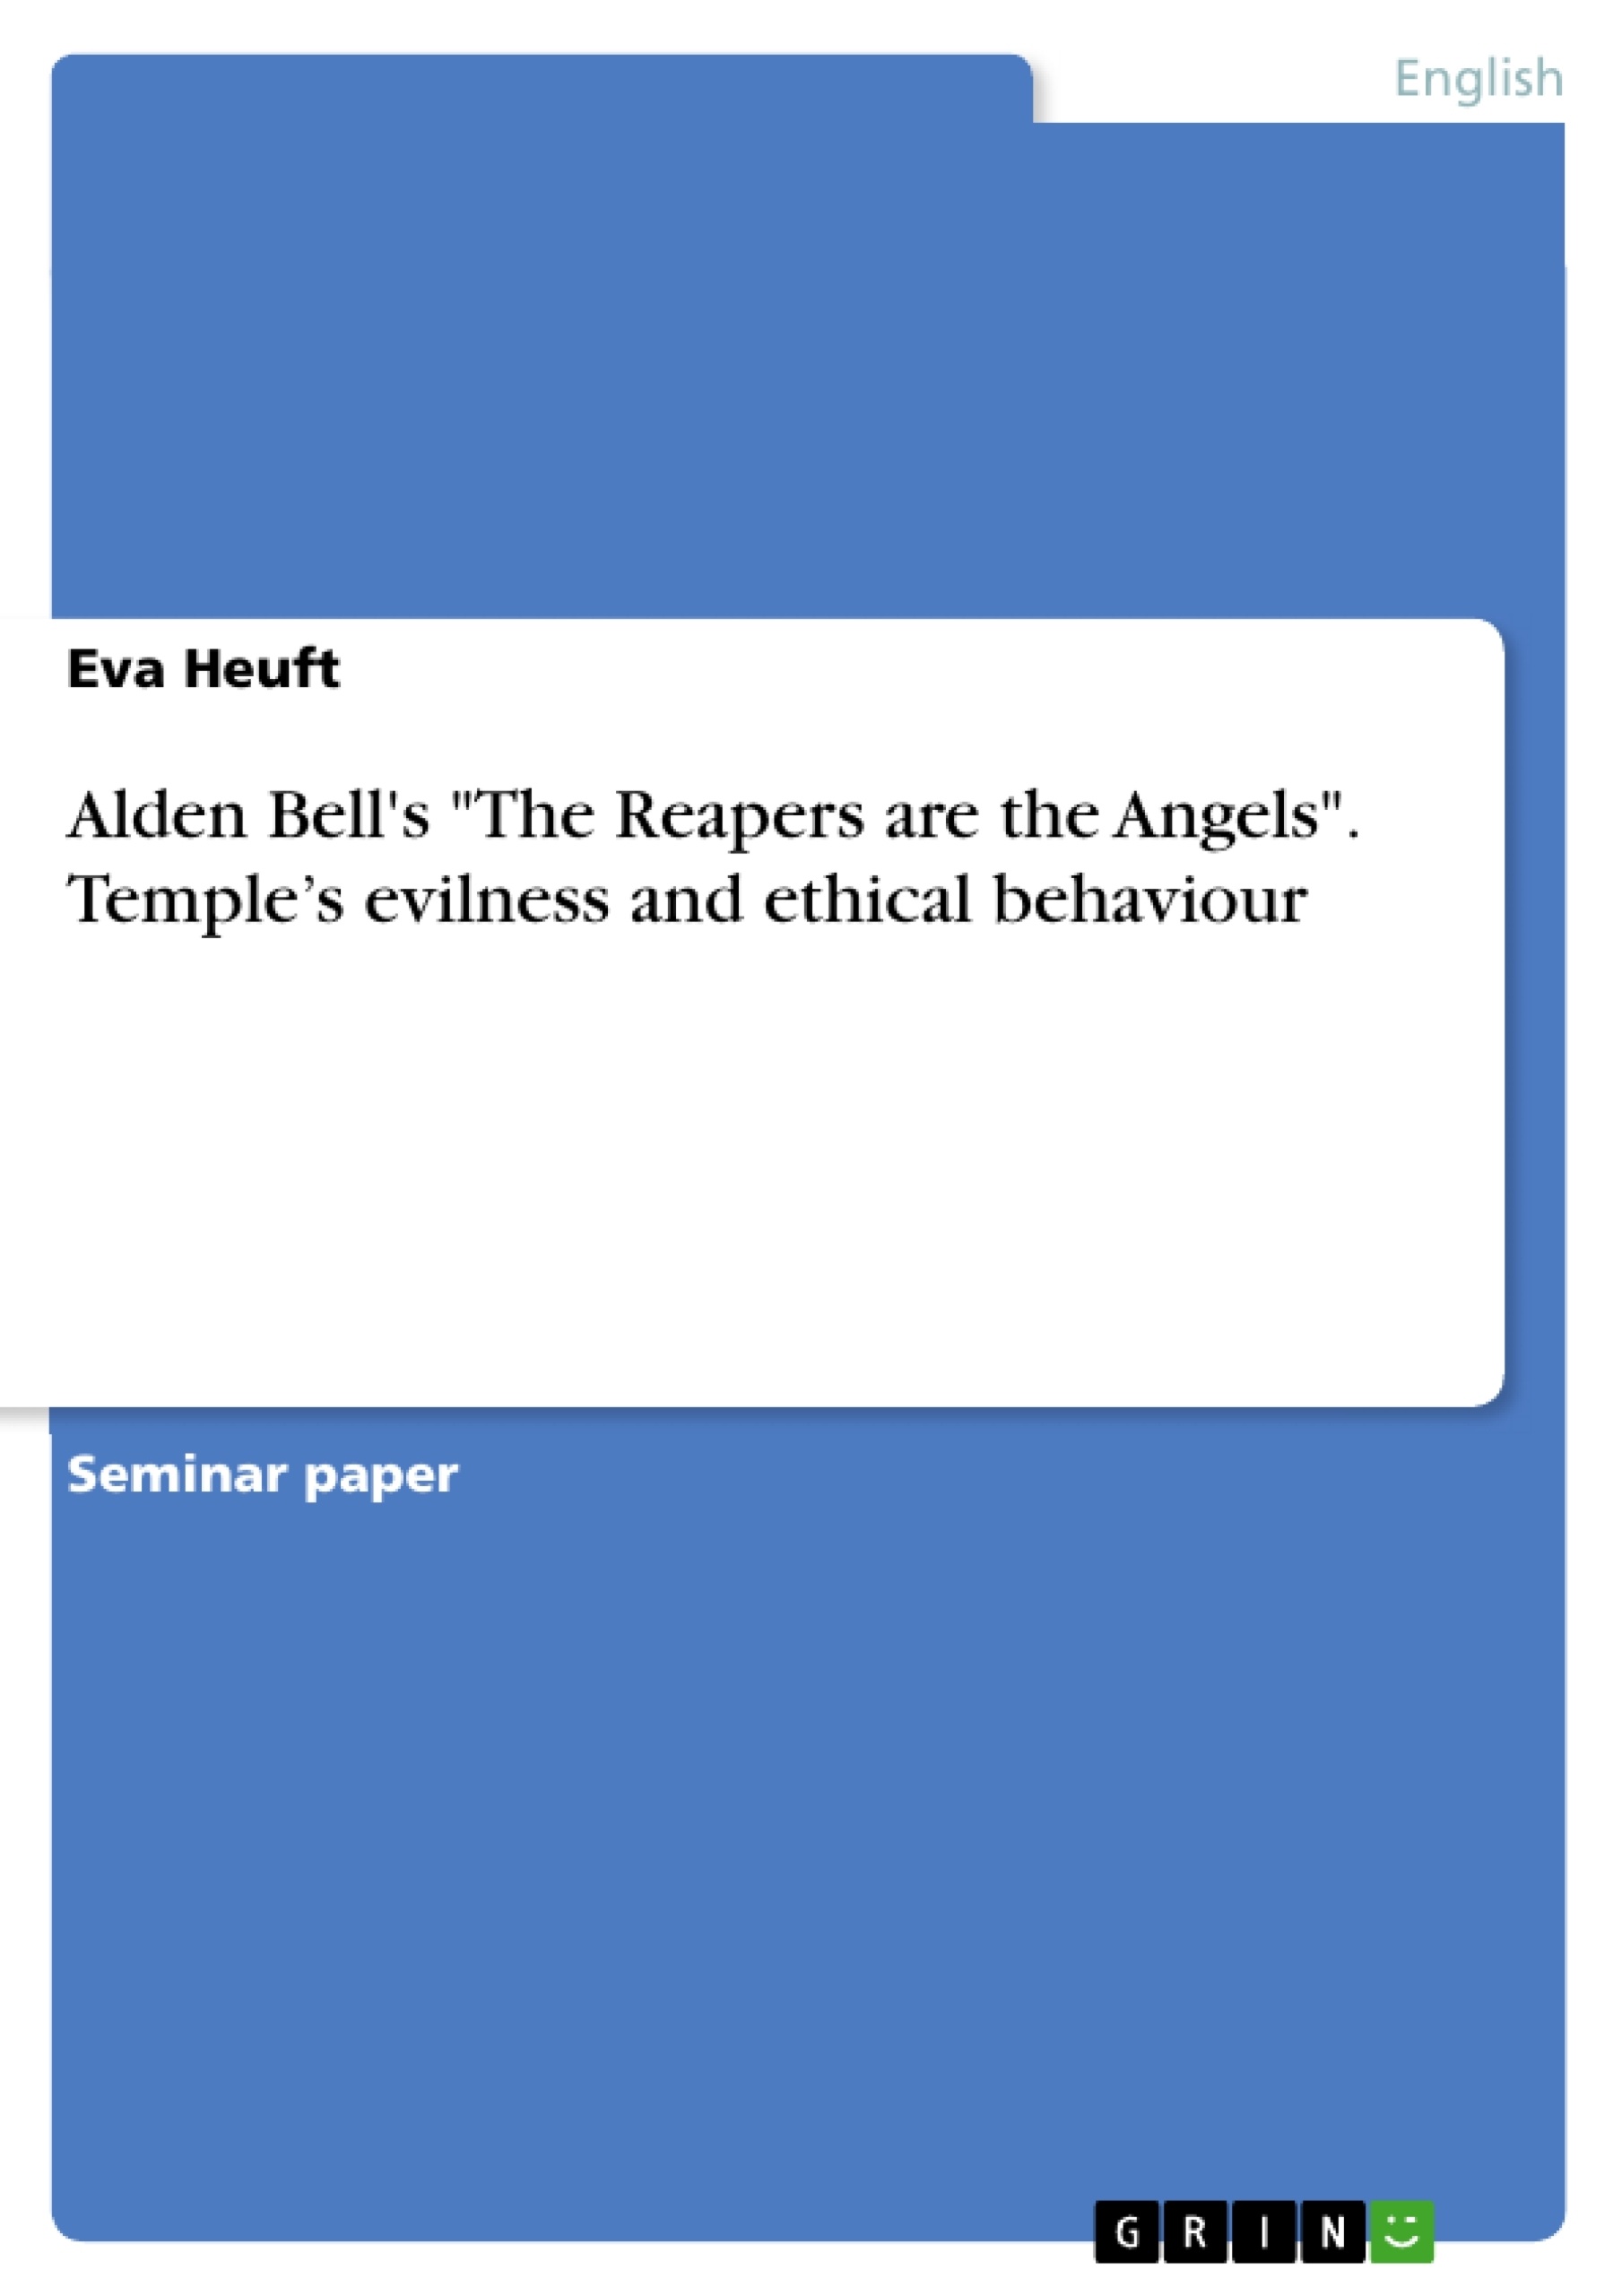 Titre: Alden Bell's "The Reapers are the Angels". Temple’s evilness and ethical behaviour